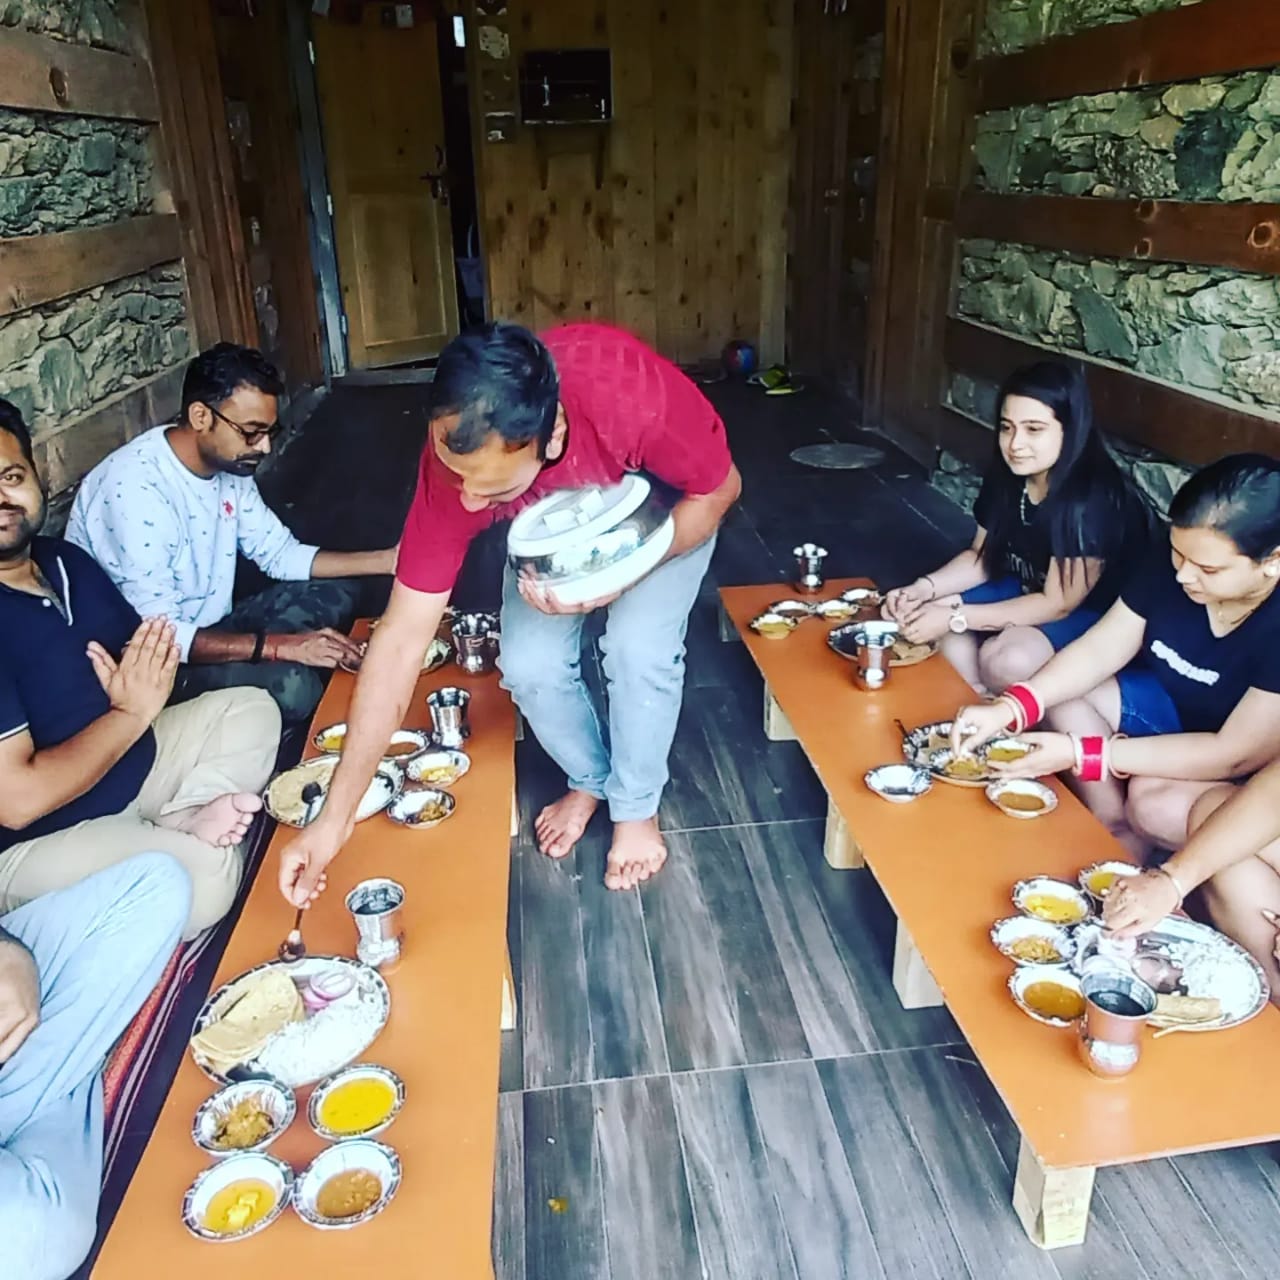 traditional himachali food being served to guests at an eco friendly homestay in sainj valley 